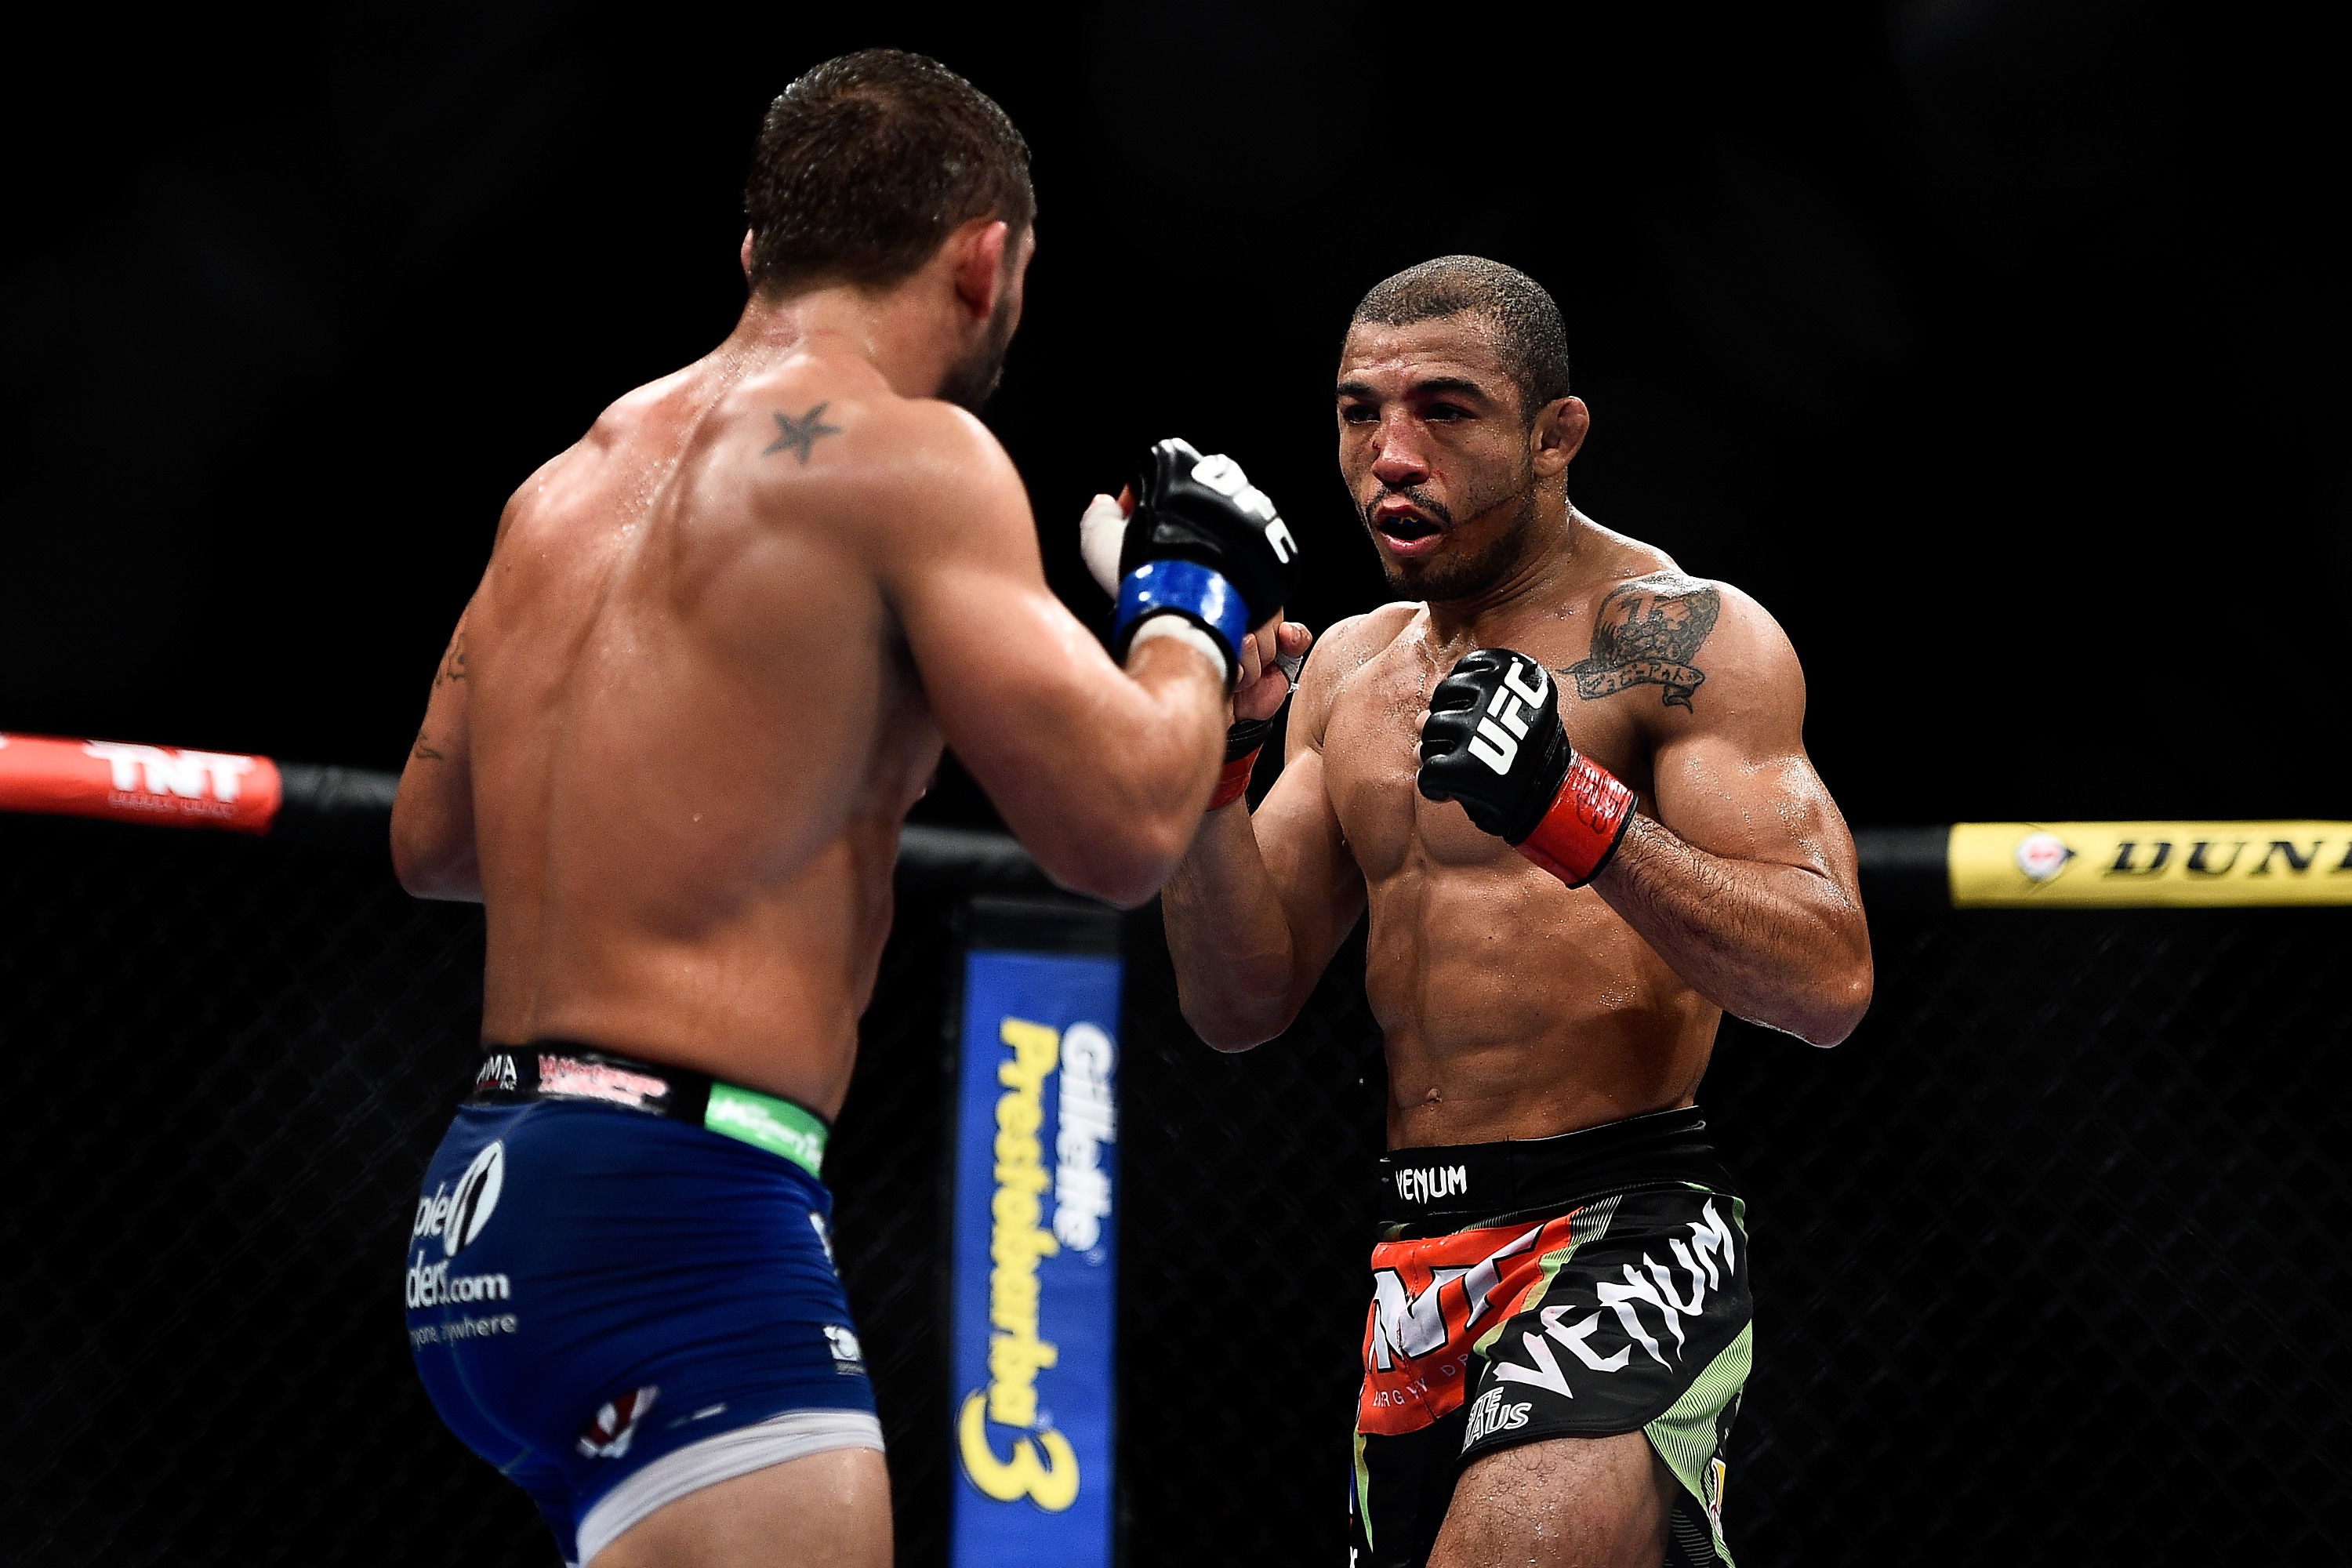 Aldo vs. 2: Key Stats, Top Moments from Thrilling Rematch at UFC 179 | Bleacher Report | Latest News, Videos and Highlights